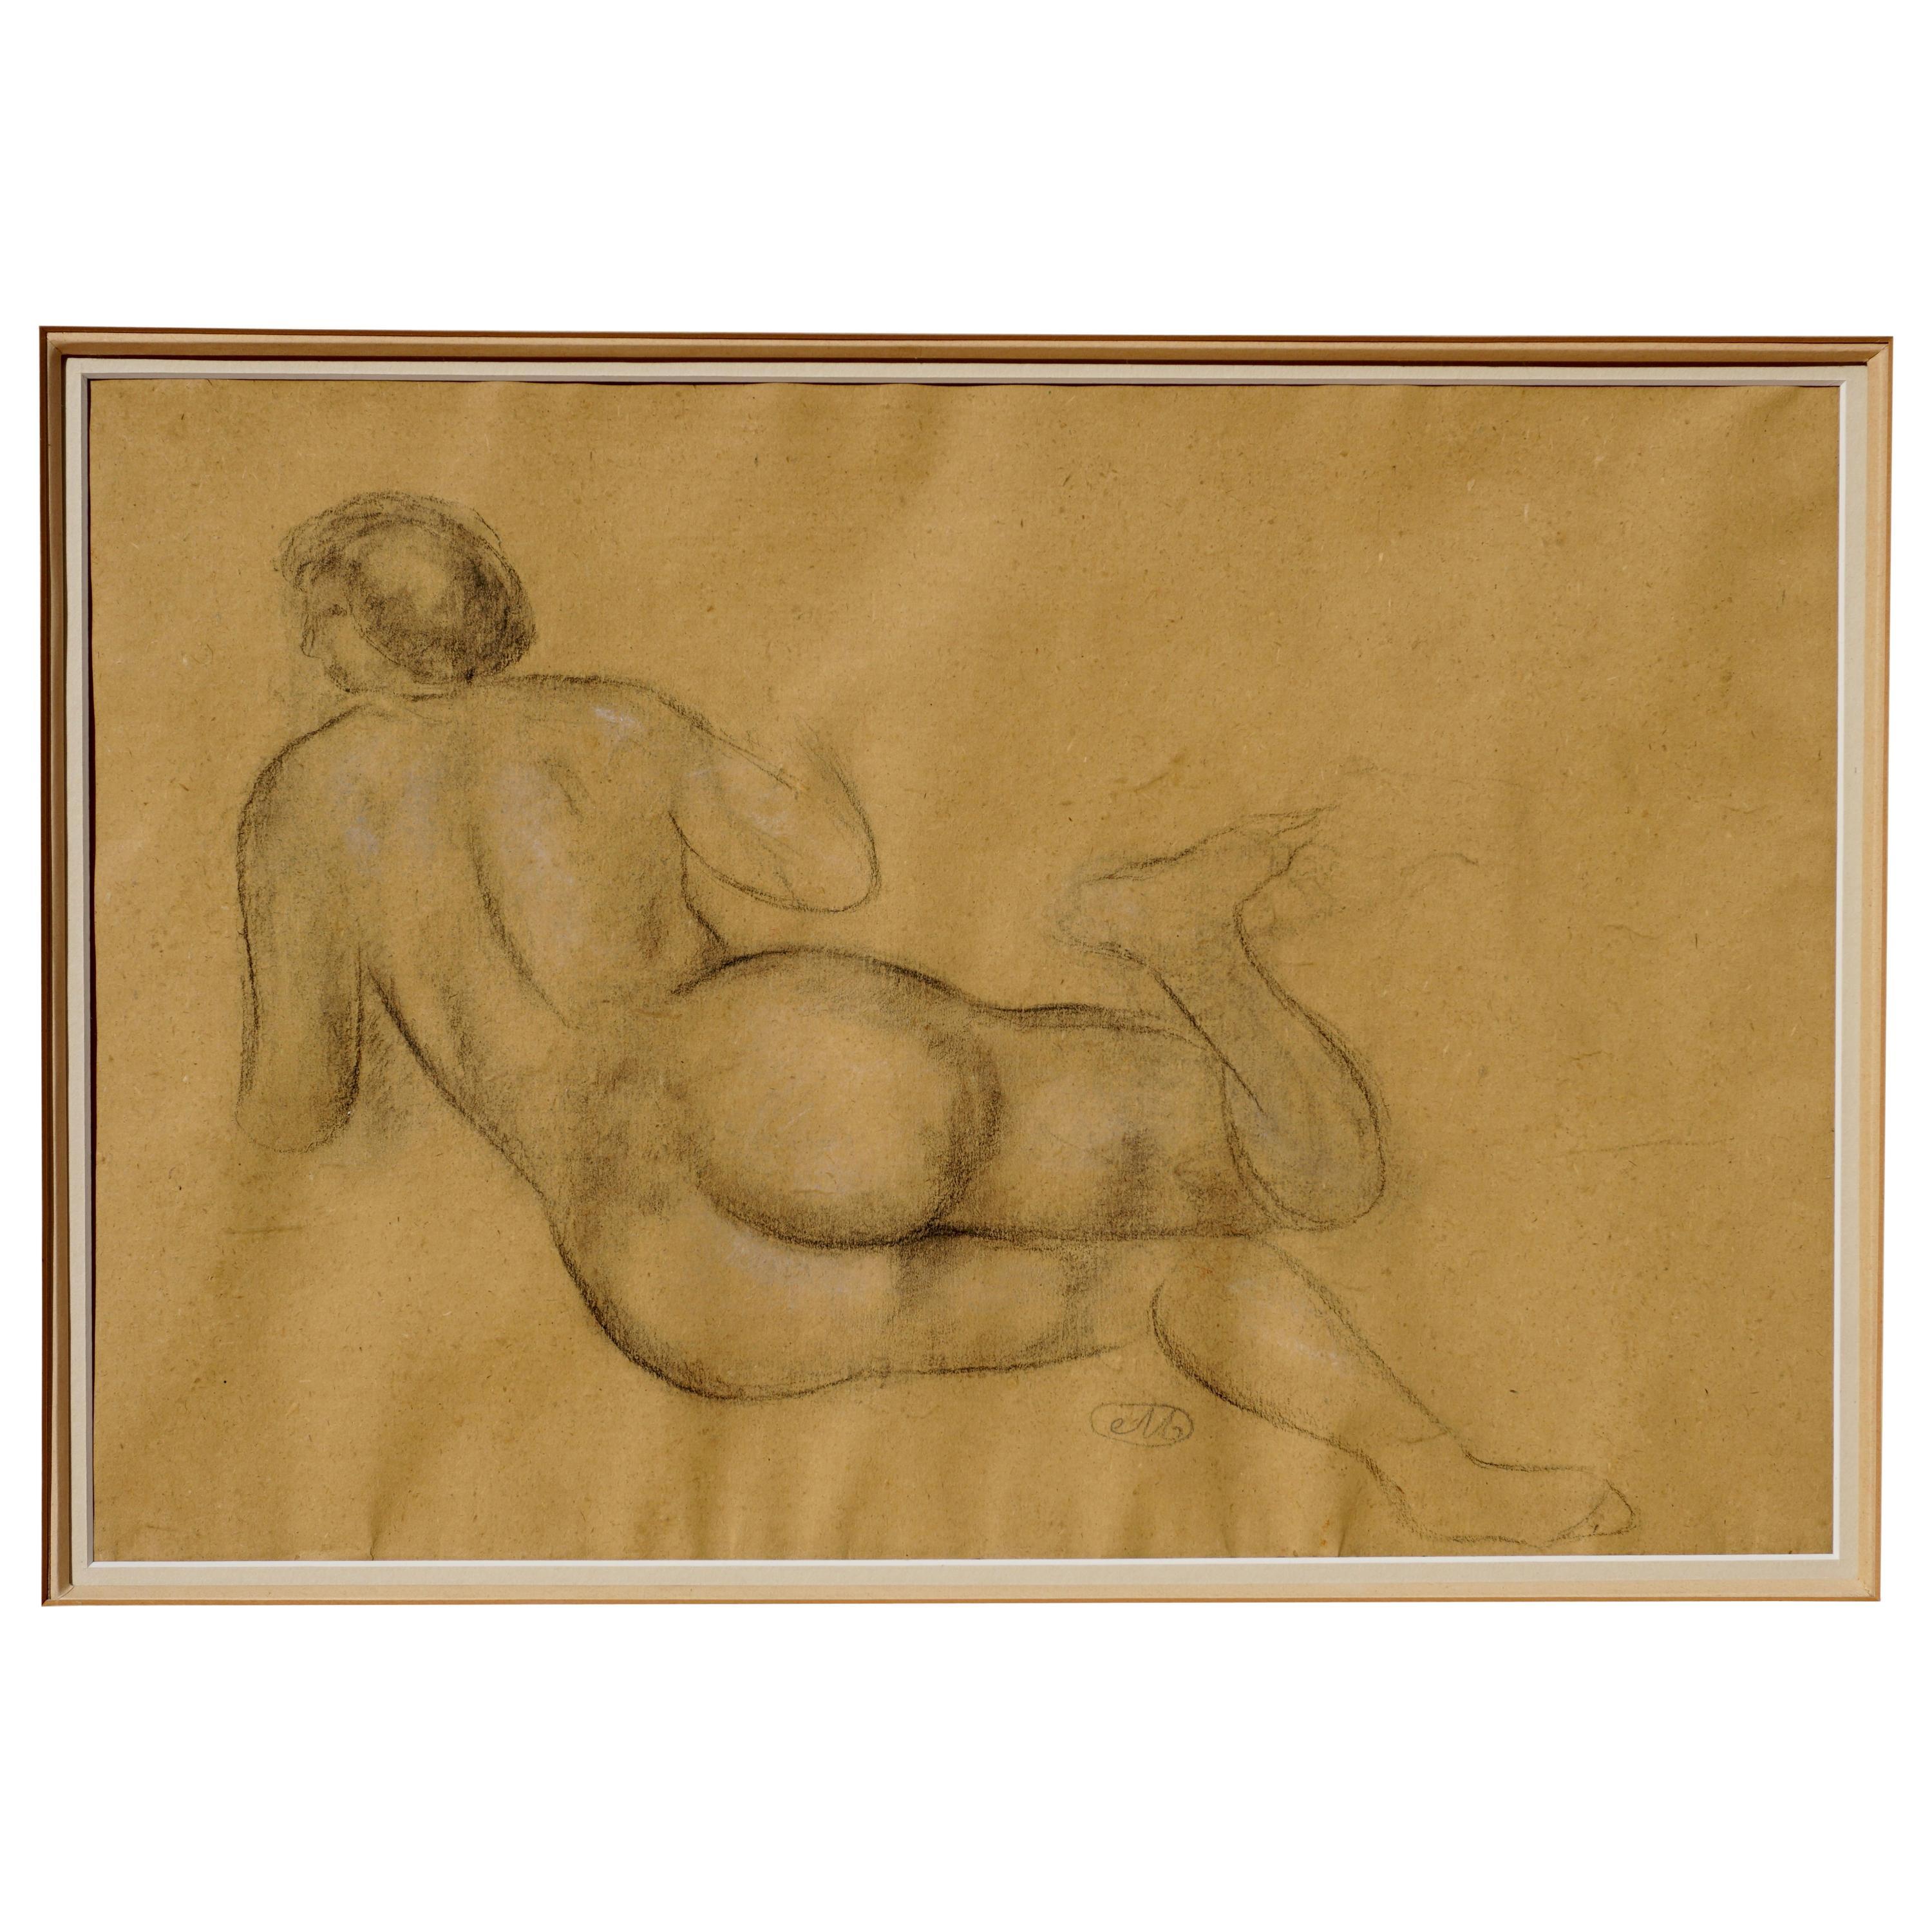 Aristide Maillol (Fr, 1861-1944) 

A very large original charcoal drawing by Aristide Maillol verified by Olivier Lorquin, Director of Galerie Dina Vierny at the Musee Maillol in Paris. A COA will be provided by Mr. Lorquin..

The female figure